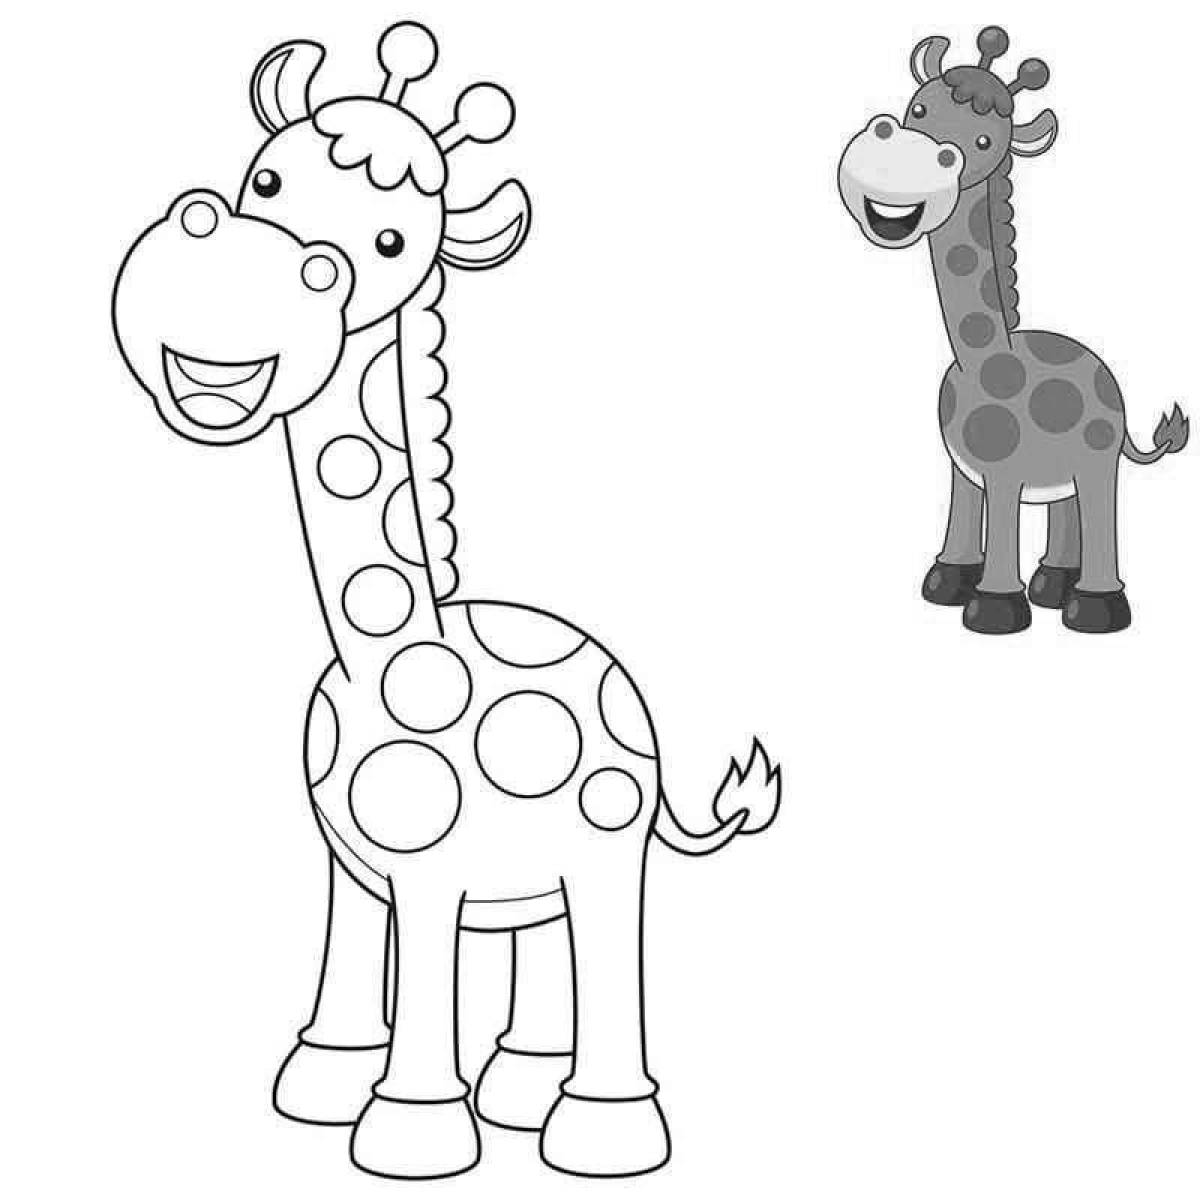 Great giraffe coloring book for kids 3-4 years old